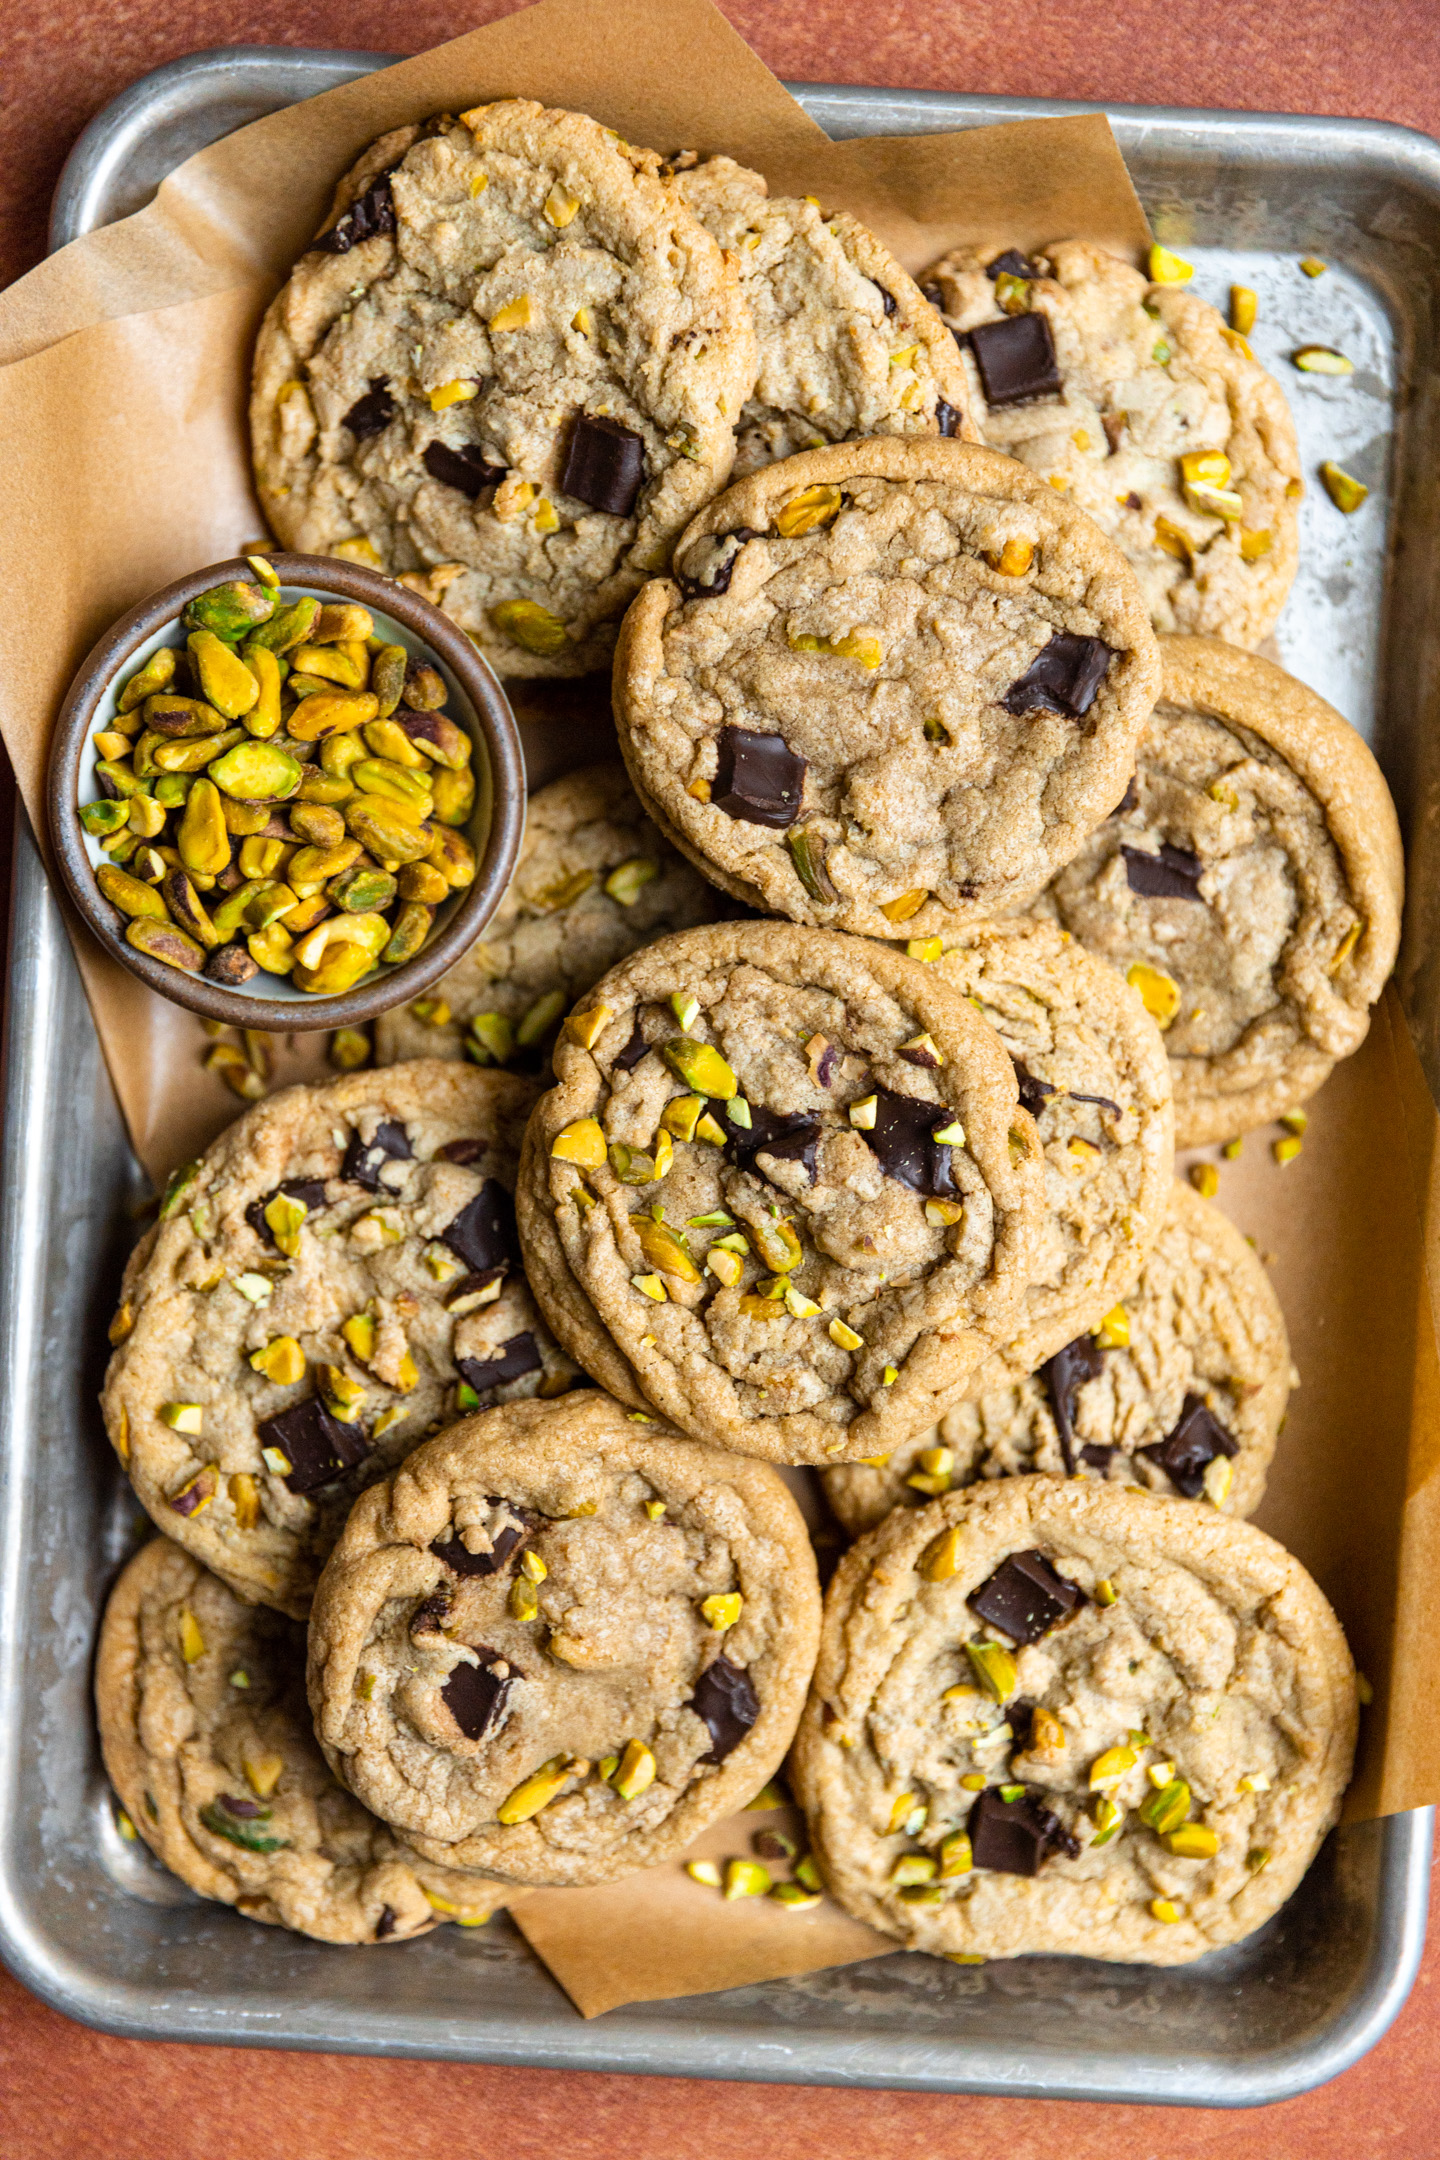 Pistachio chocolate chip cookies on a parchment lined tray next to a bowl of pistachios.